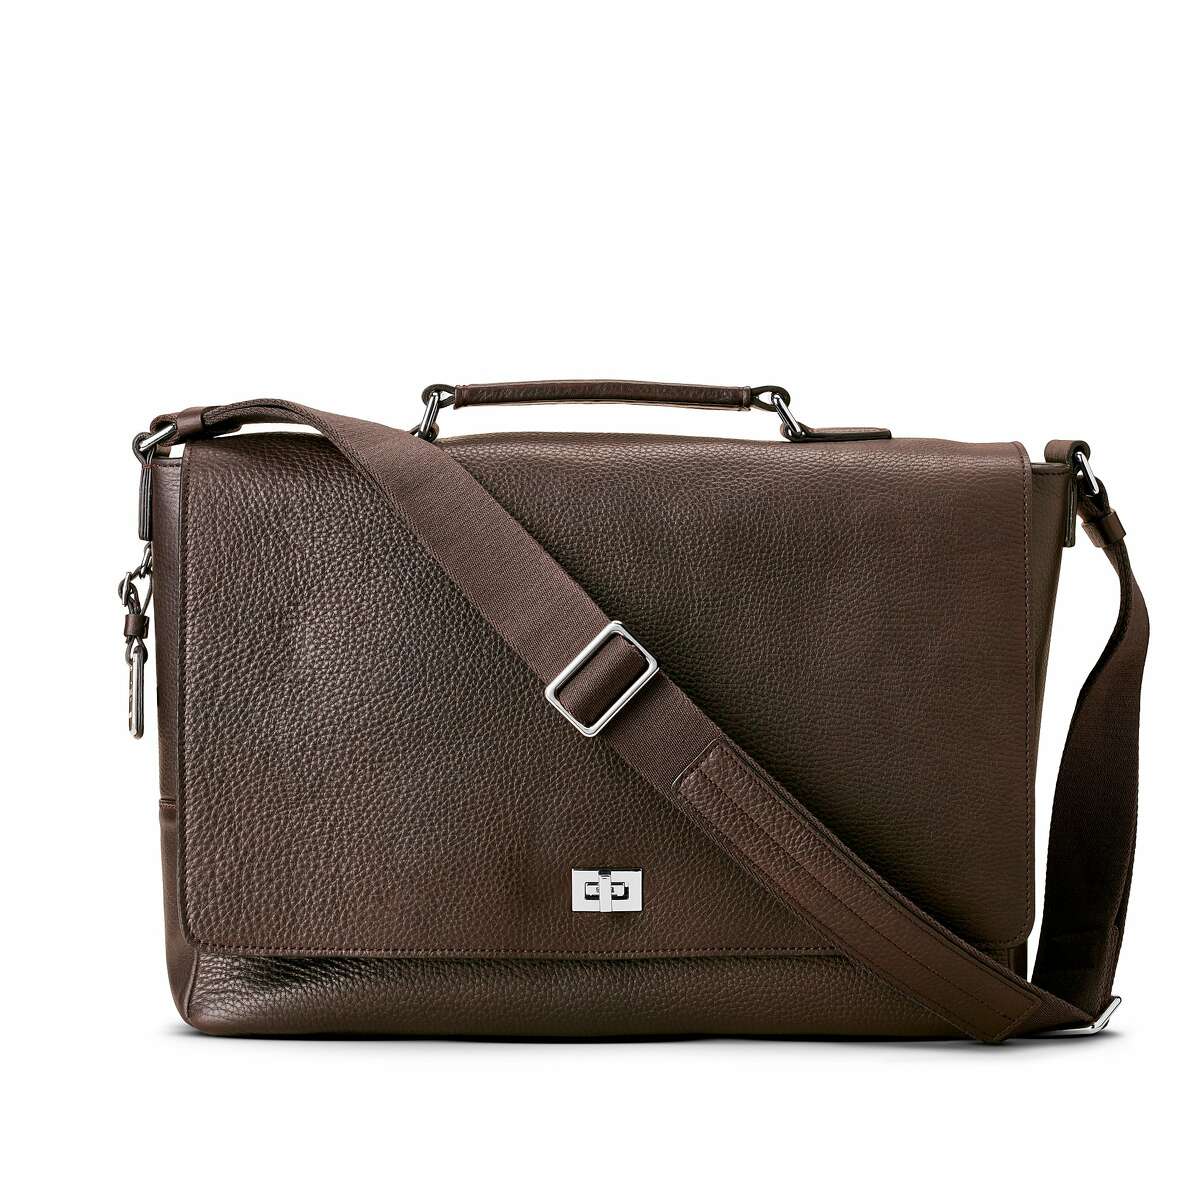 Shinola Leather Messenger Brief in Deep Brown. Comes in other colors. Retails for $1,295.